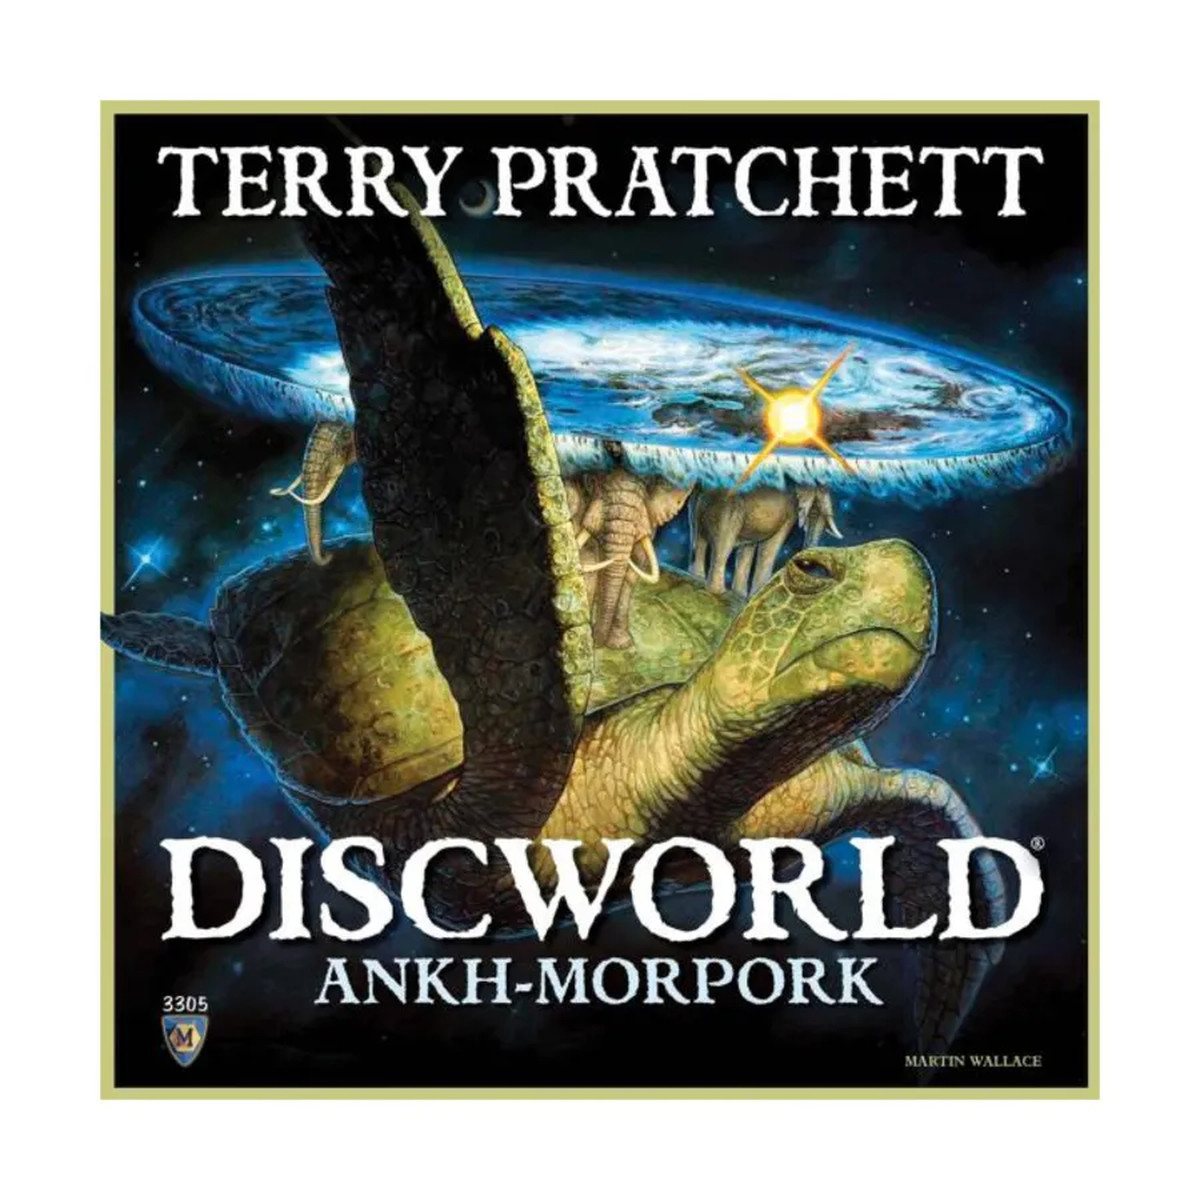 The box art of the Discworld - Ankh- Morpork board game. It has the name of the game in big letters, and a rendering of the Disc is on the cover. In case you don’t know, the Disc is a flat universe on the back of some elephants on top of a giant turtle.